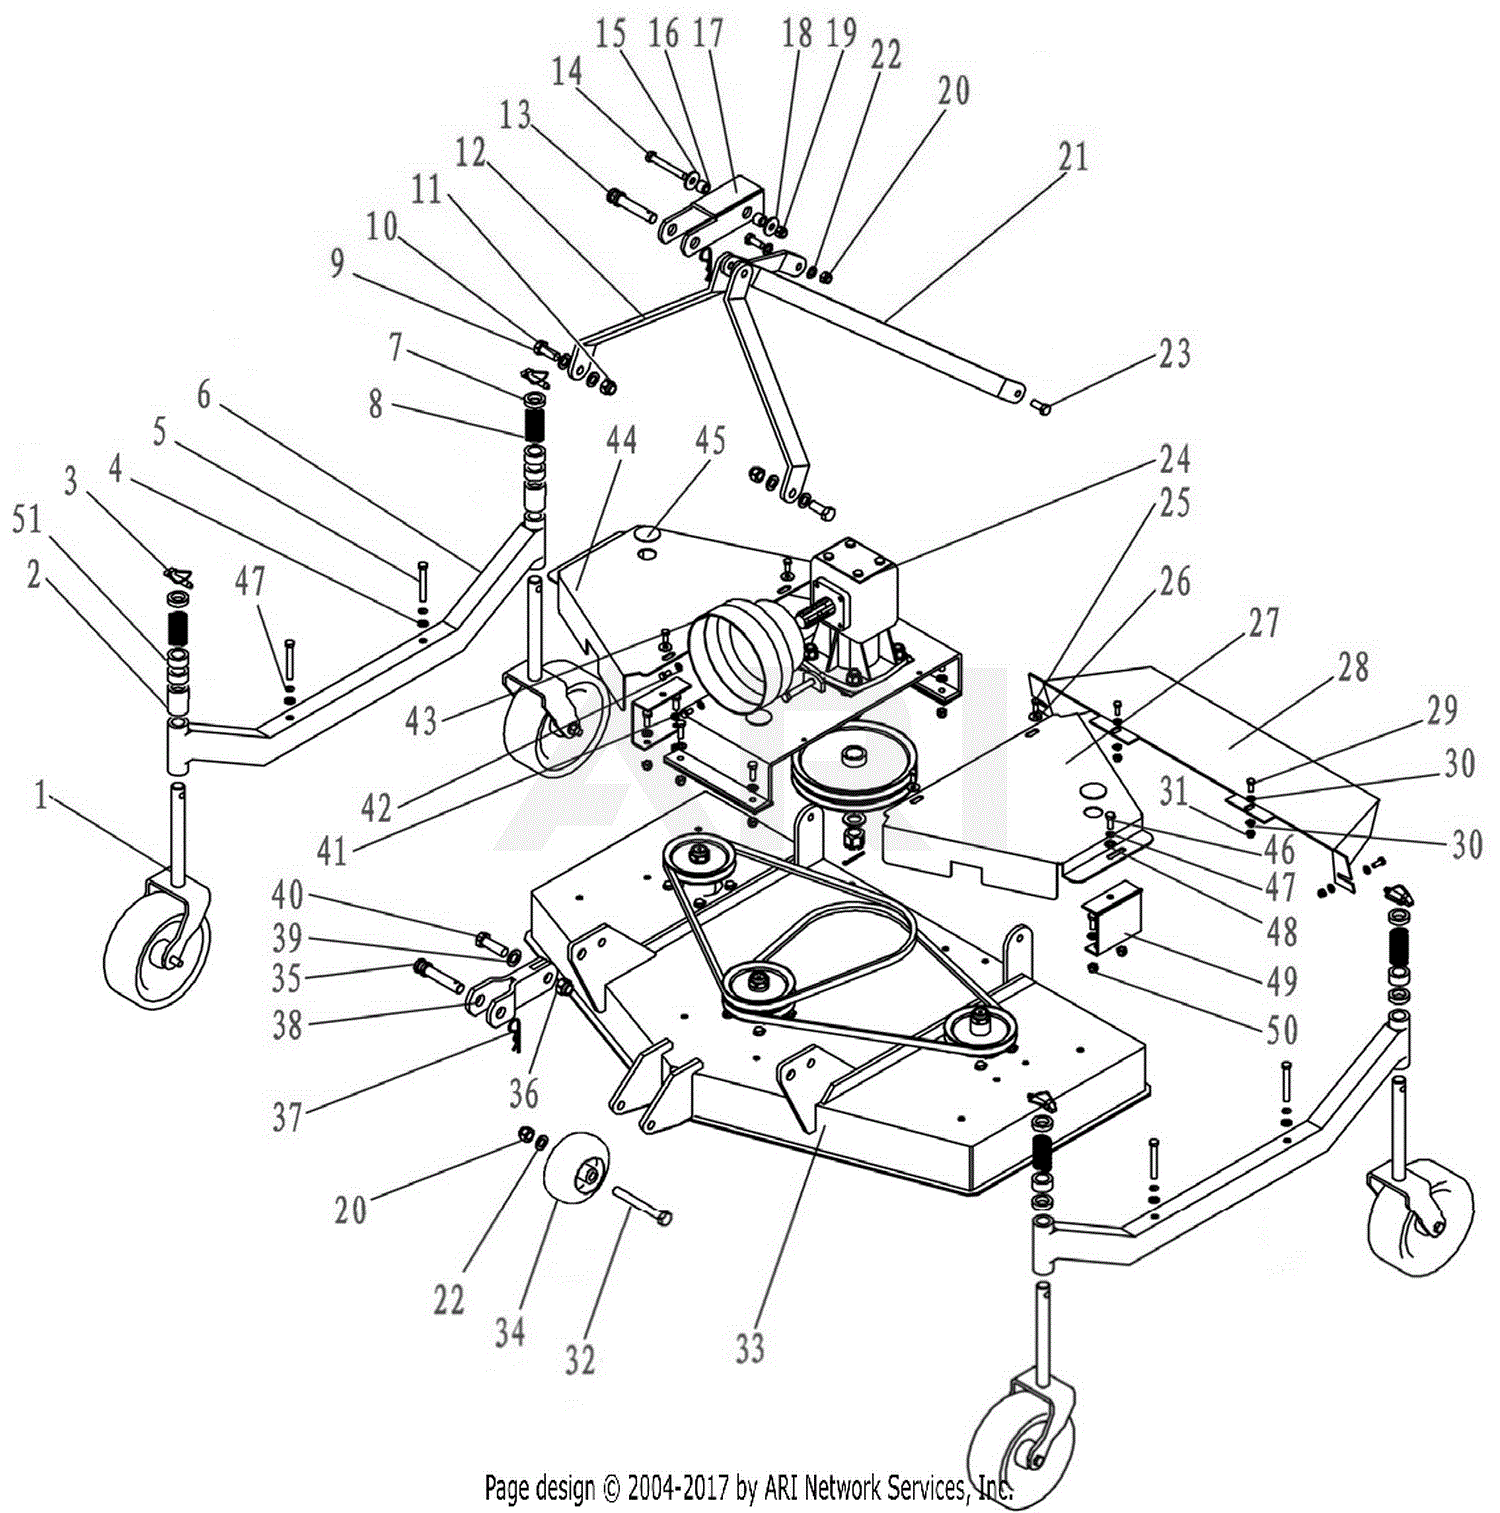 DR Power 72" Finish Mower Parts Diagram for 72" Deck Assembly